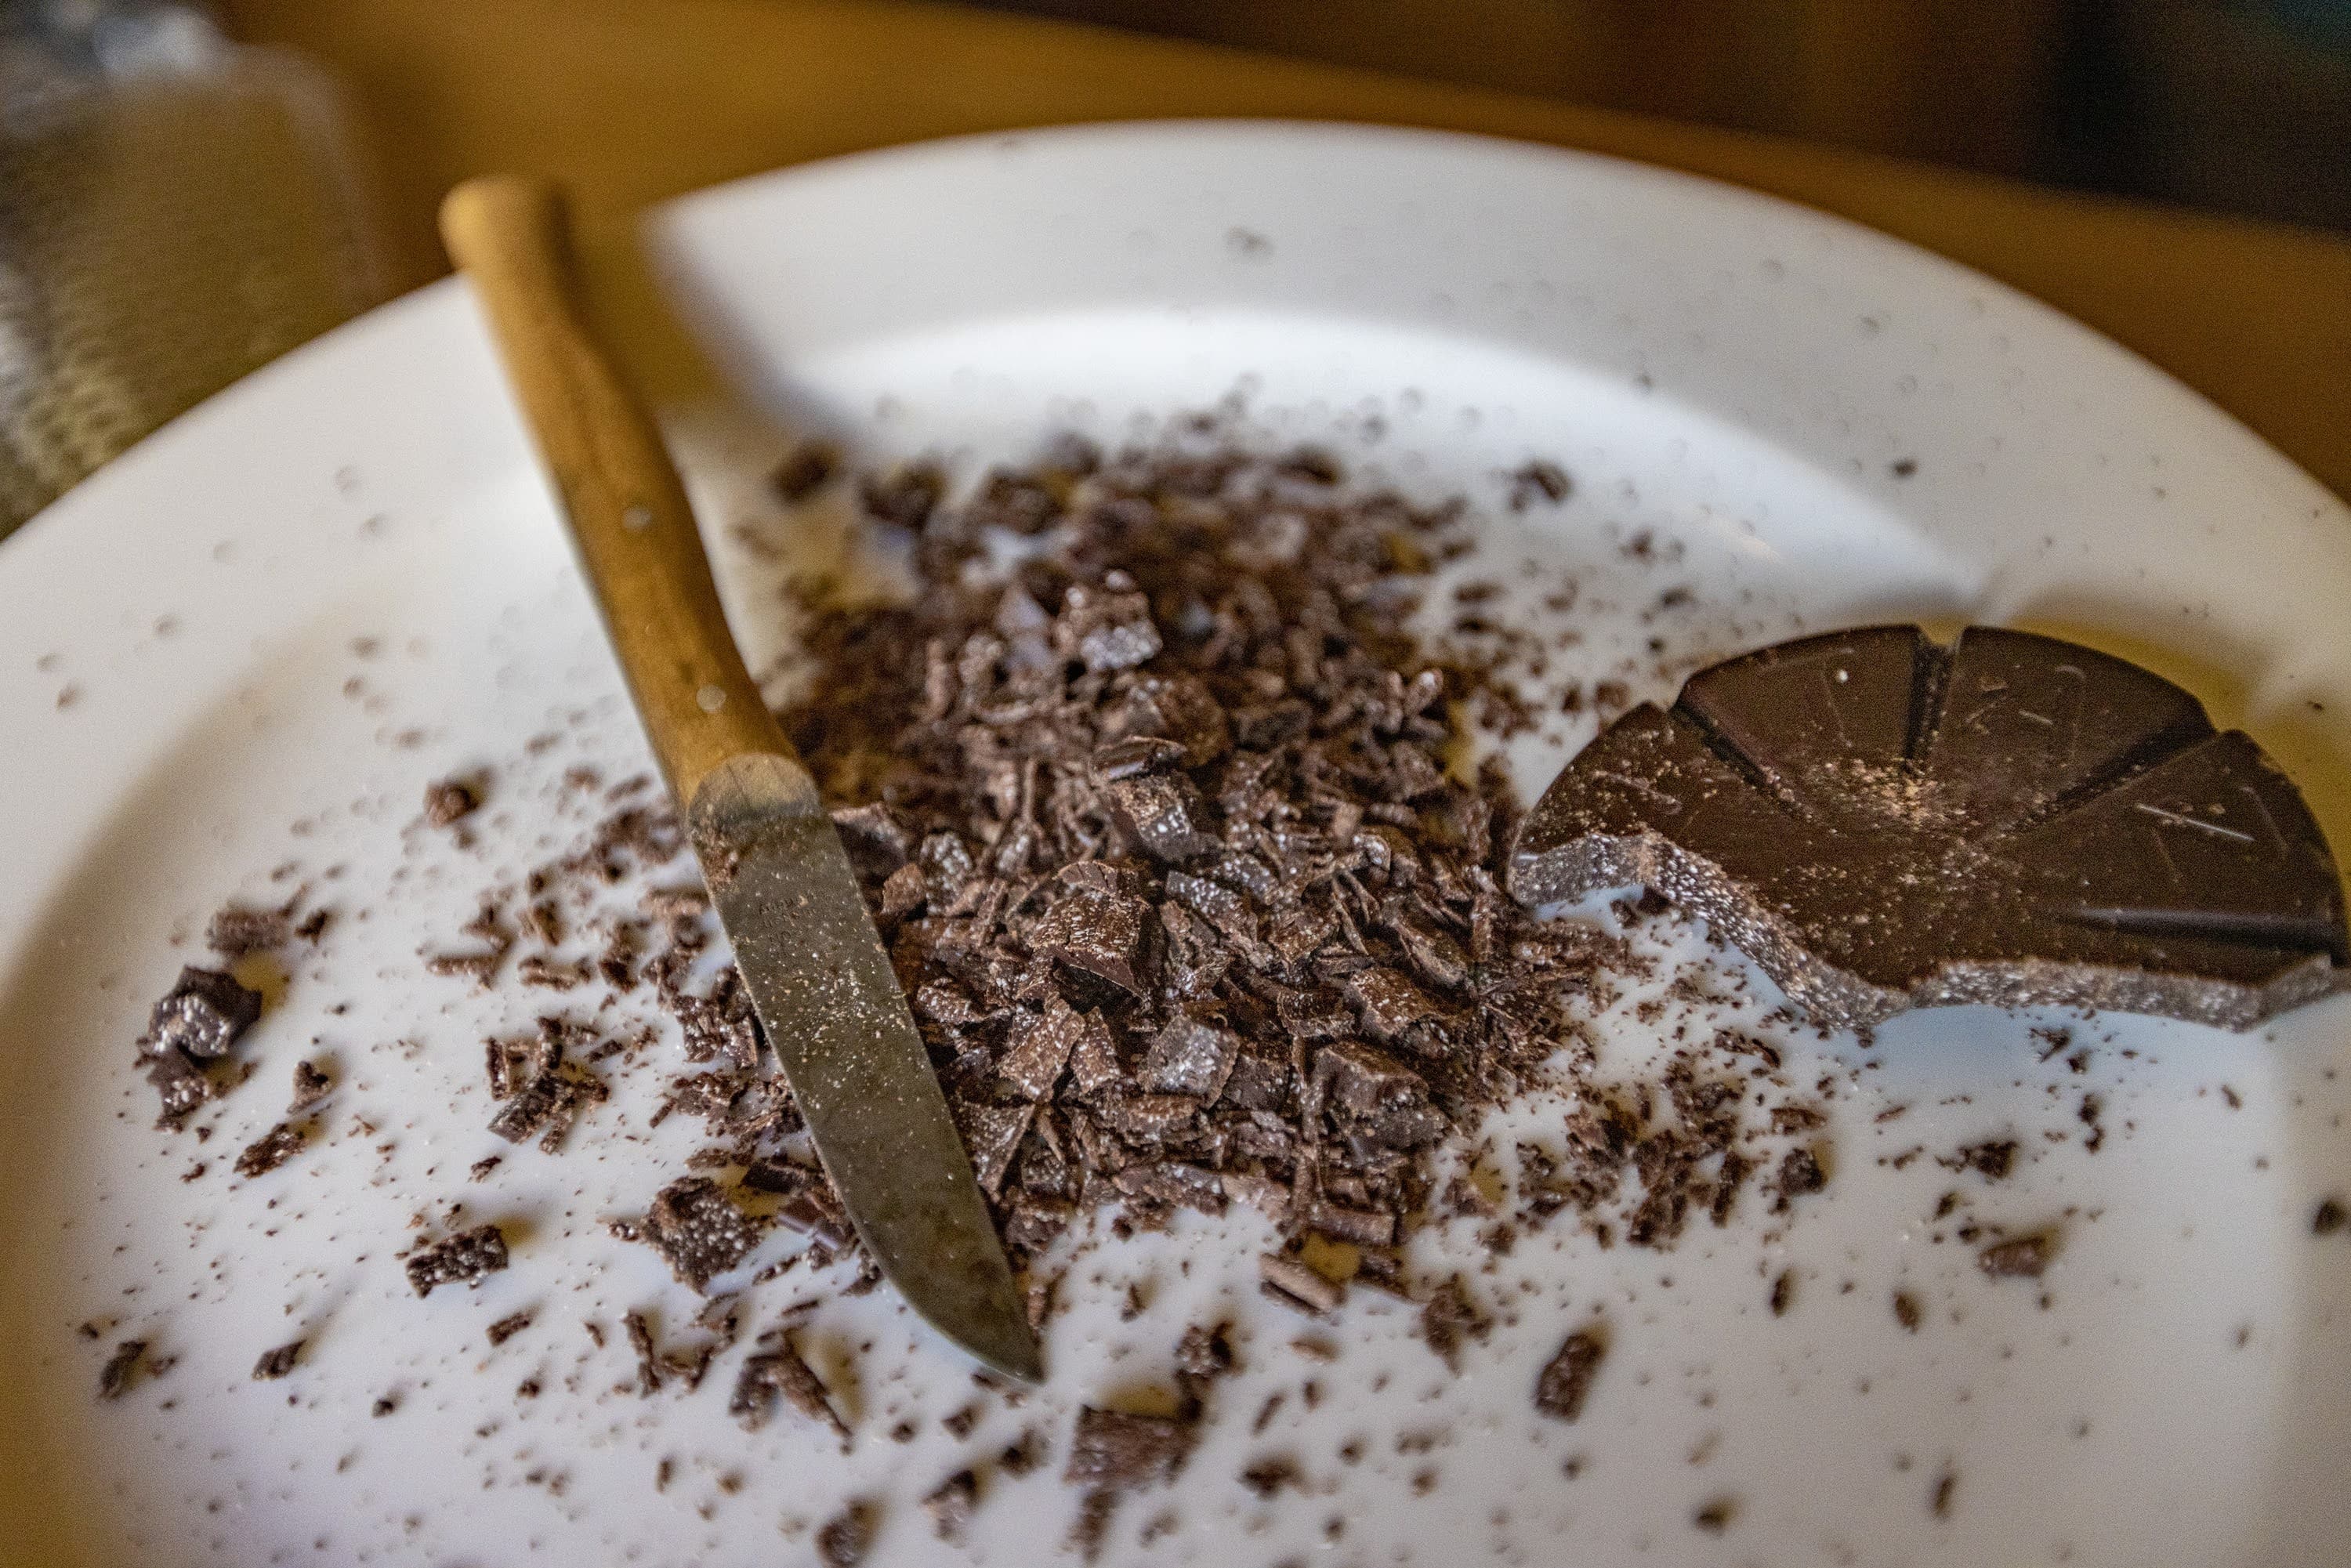 The chocolate tablet from Taza Chocolate in Somerville is shaved using a knife, just as it would have been done in many colonial households. (Jesse Costa/WBUR)